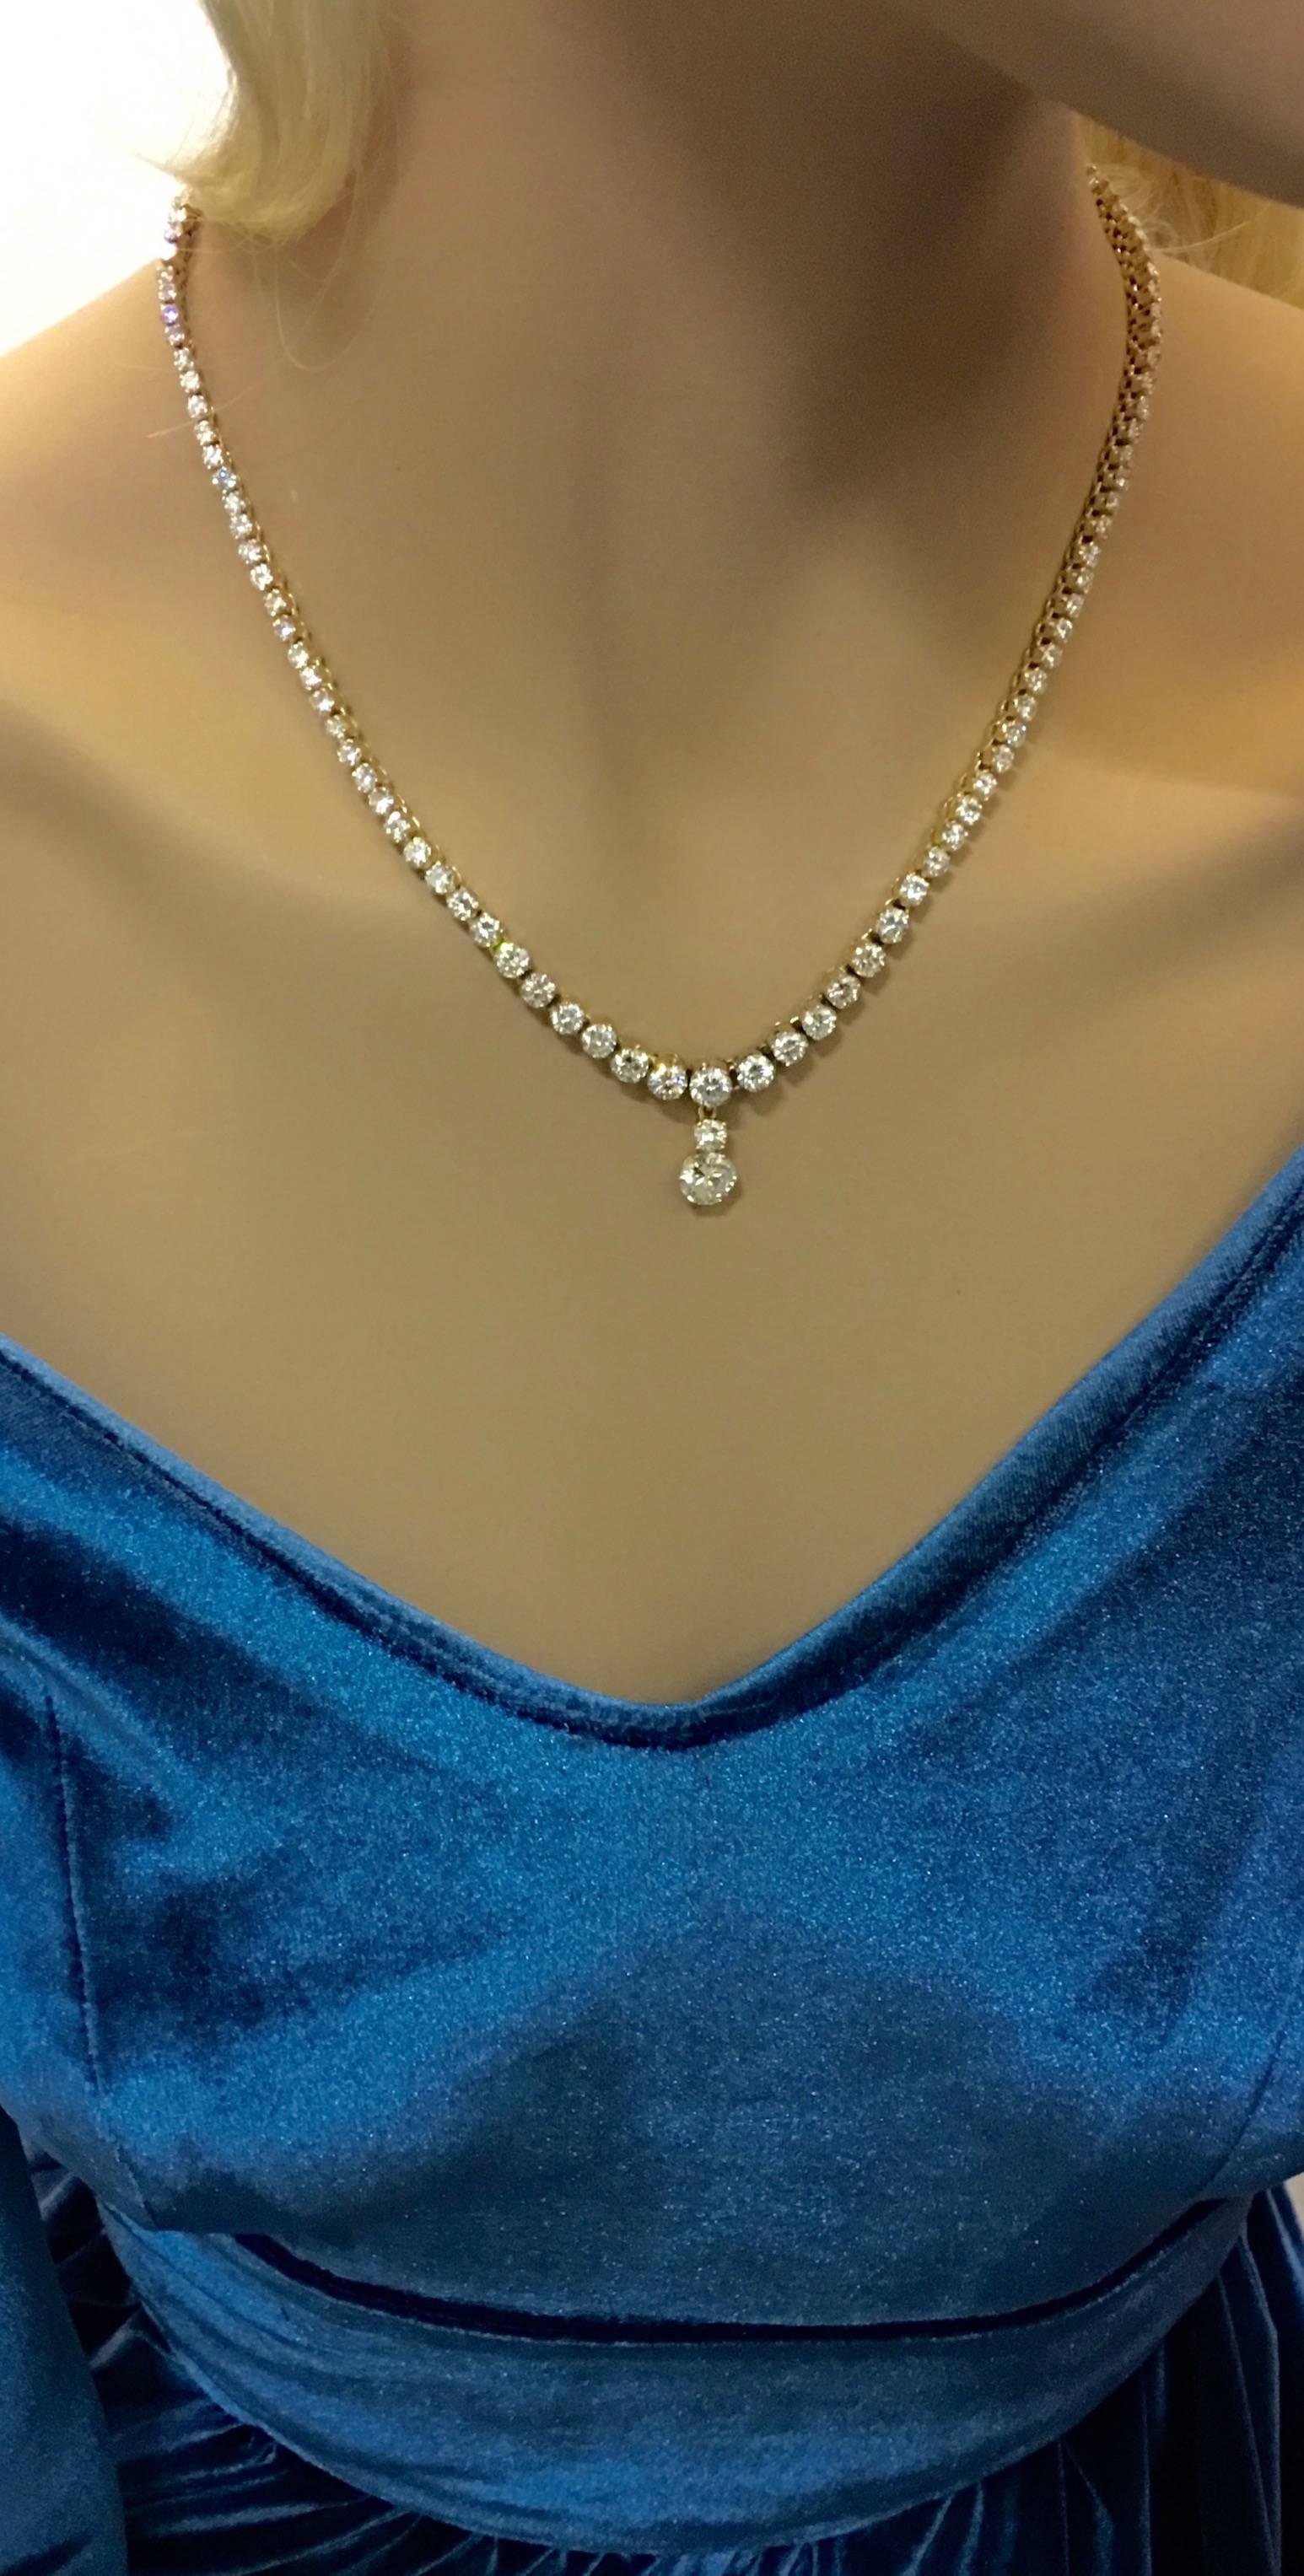 Impressive quality of Round cut Diamond necklace on yellow gold 18k.
The pendant holds a more significant Diamond. The pendant can be remove to wear the necklace as a 'rivière'.

